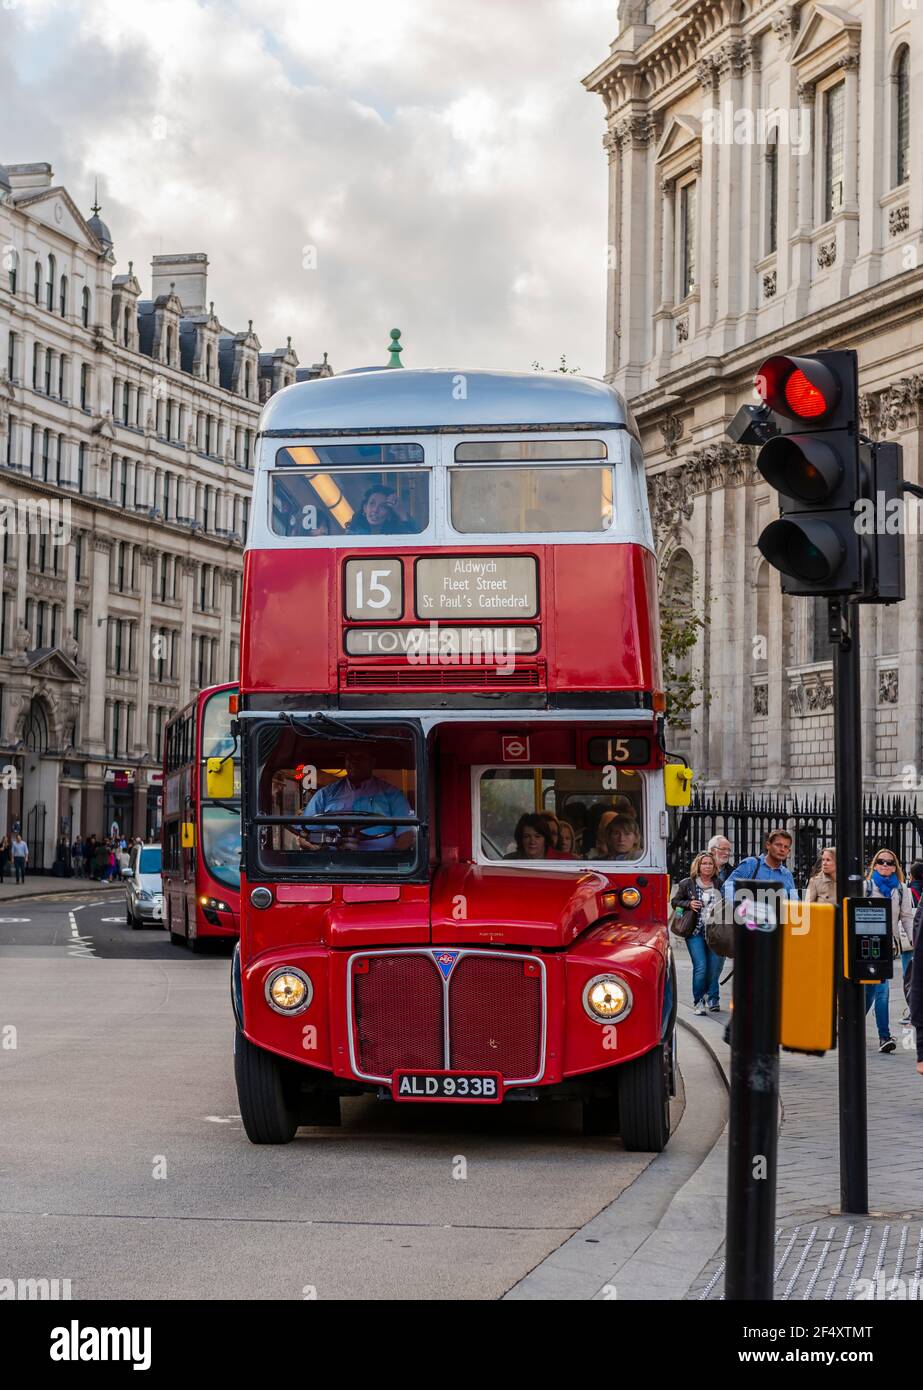 Famous double decker bus, symbol of London, on a street in London, England, UK Stock Photo